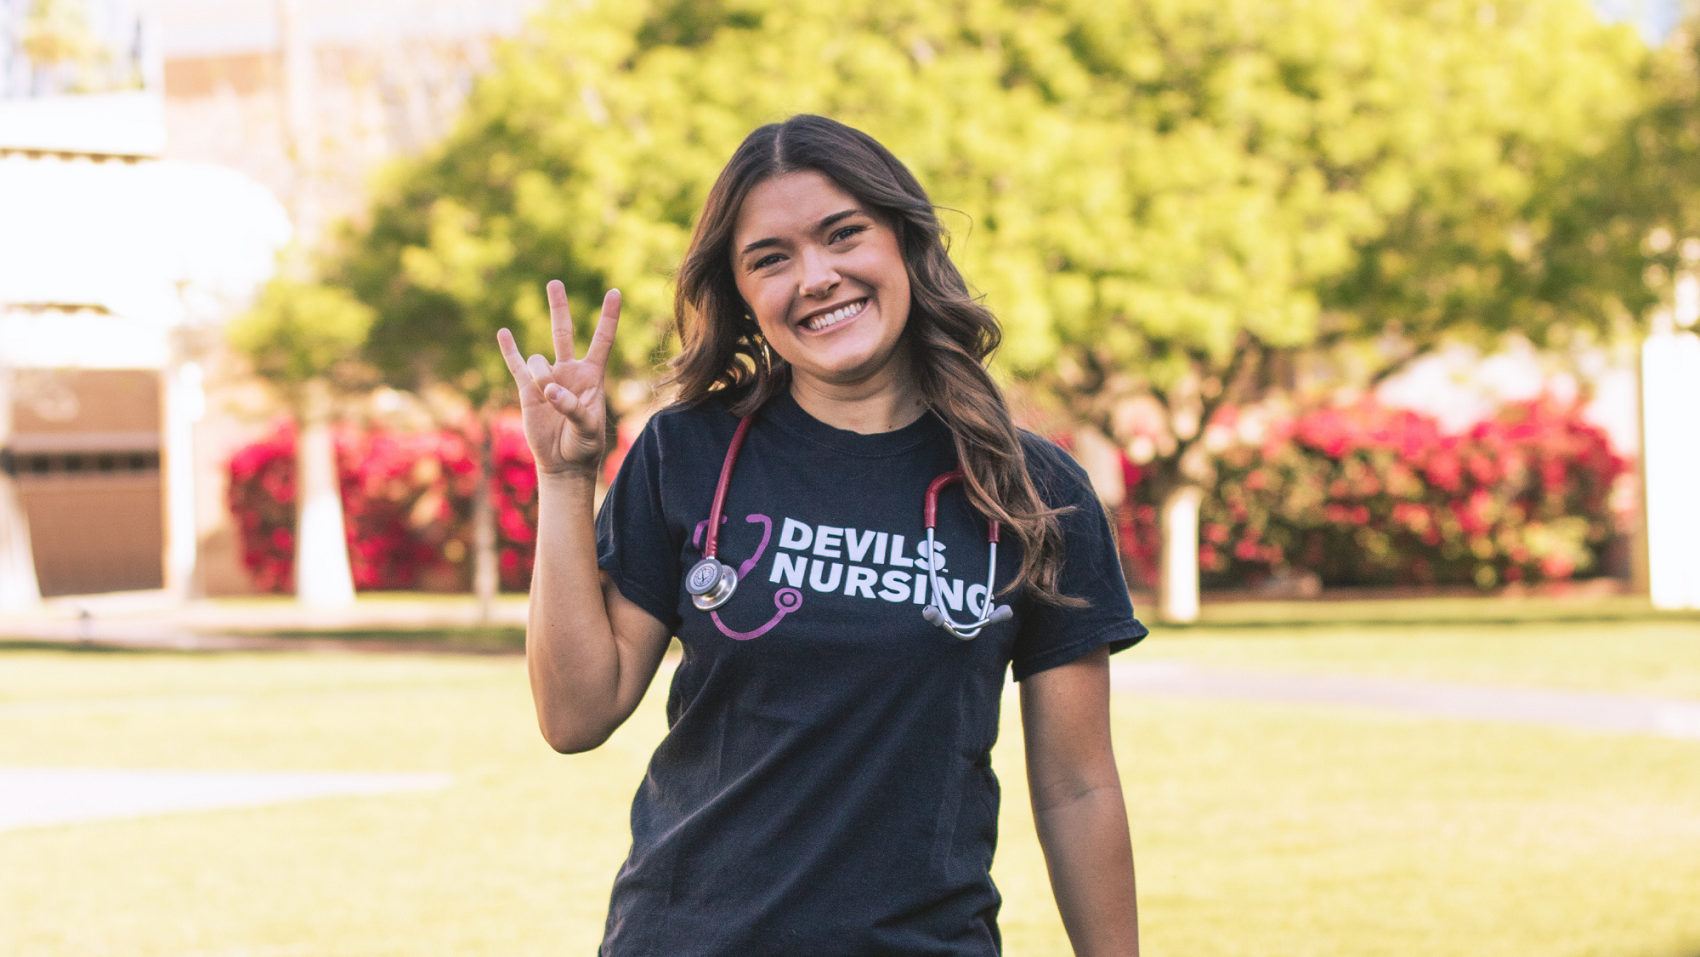  Smiles at the camera with a stethoscope around her neck while throwing a pitchfork. She is wearing a black shirt that says Devils Nursing on it. 